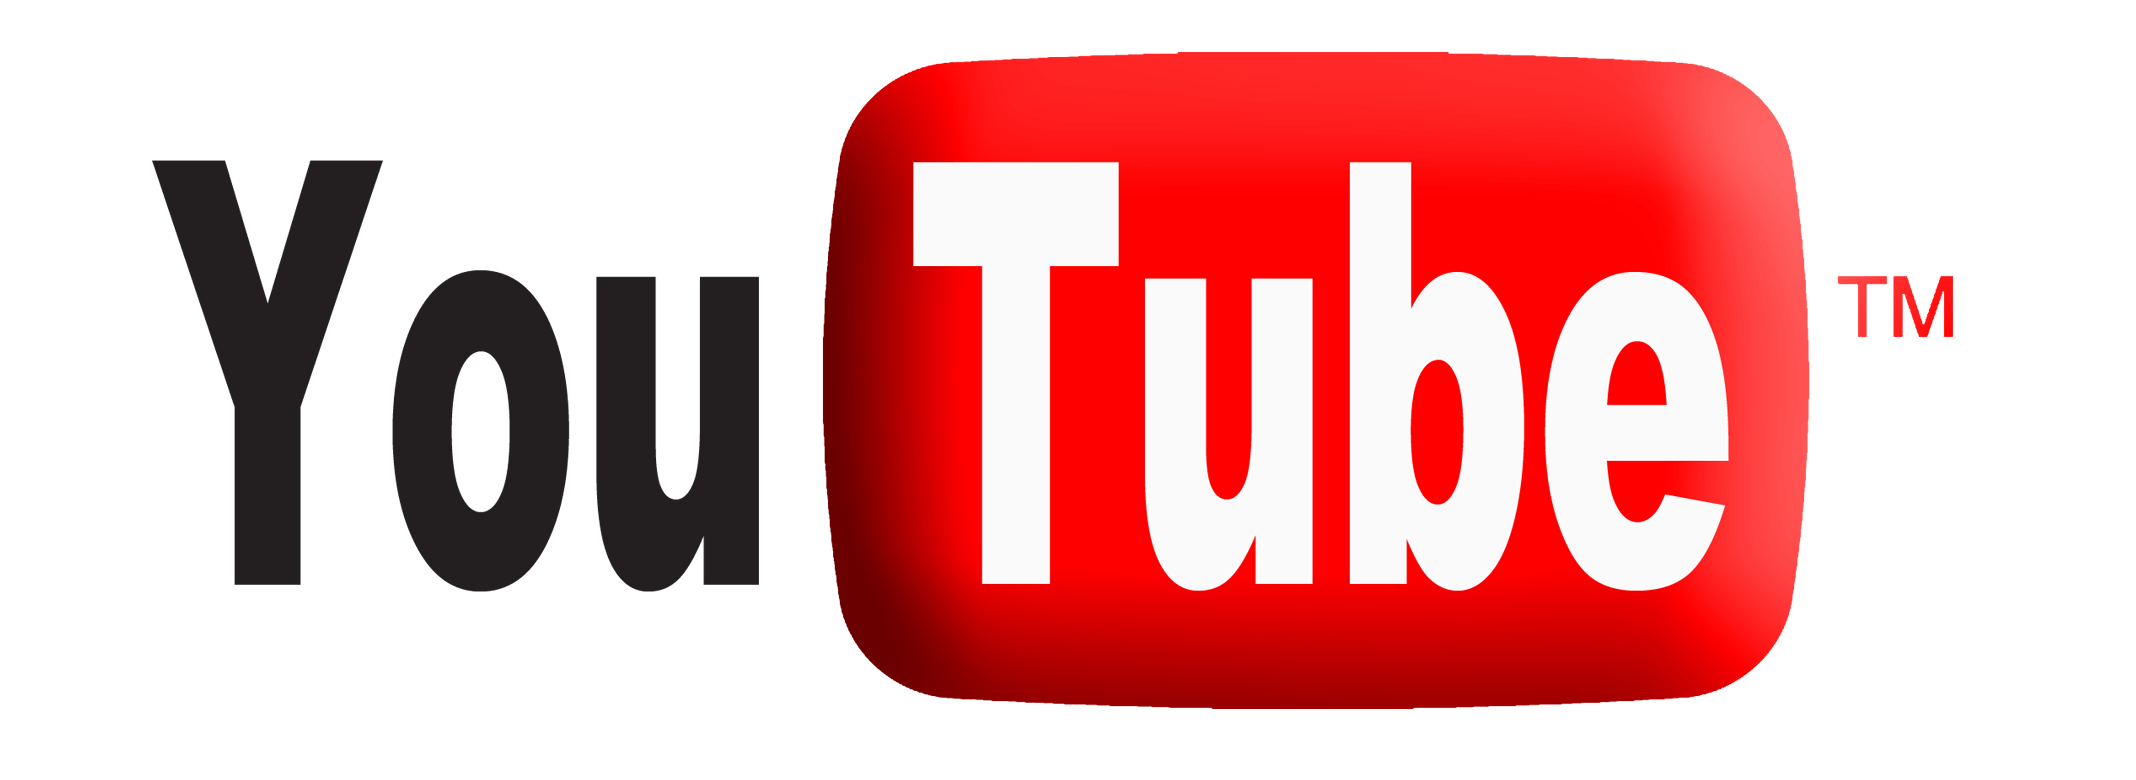 Yoututbe Logo - Youtube PNG image free download